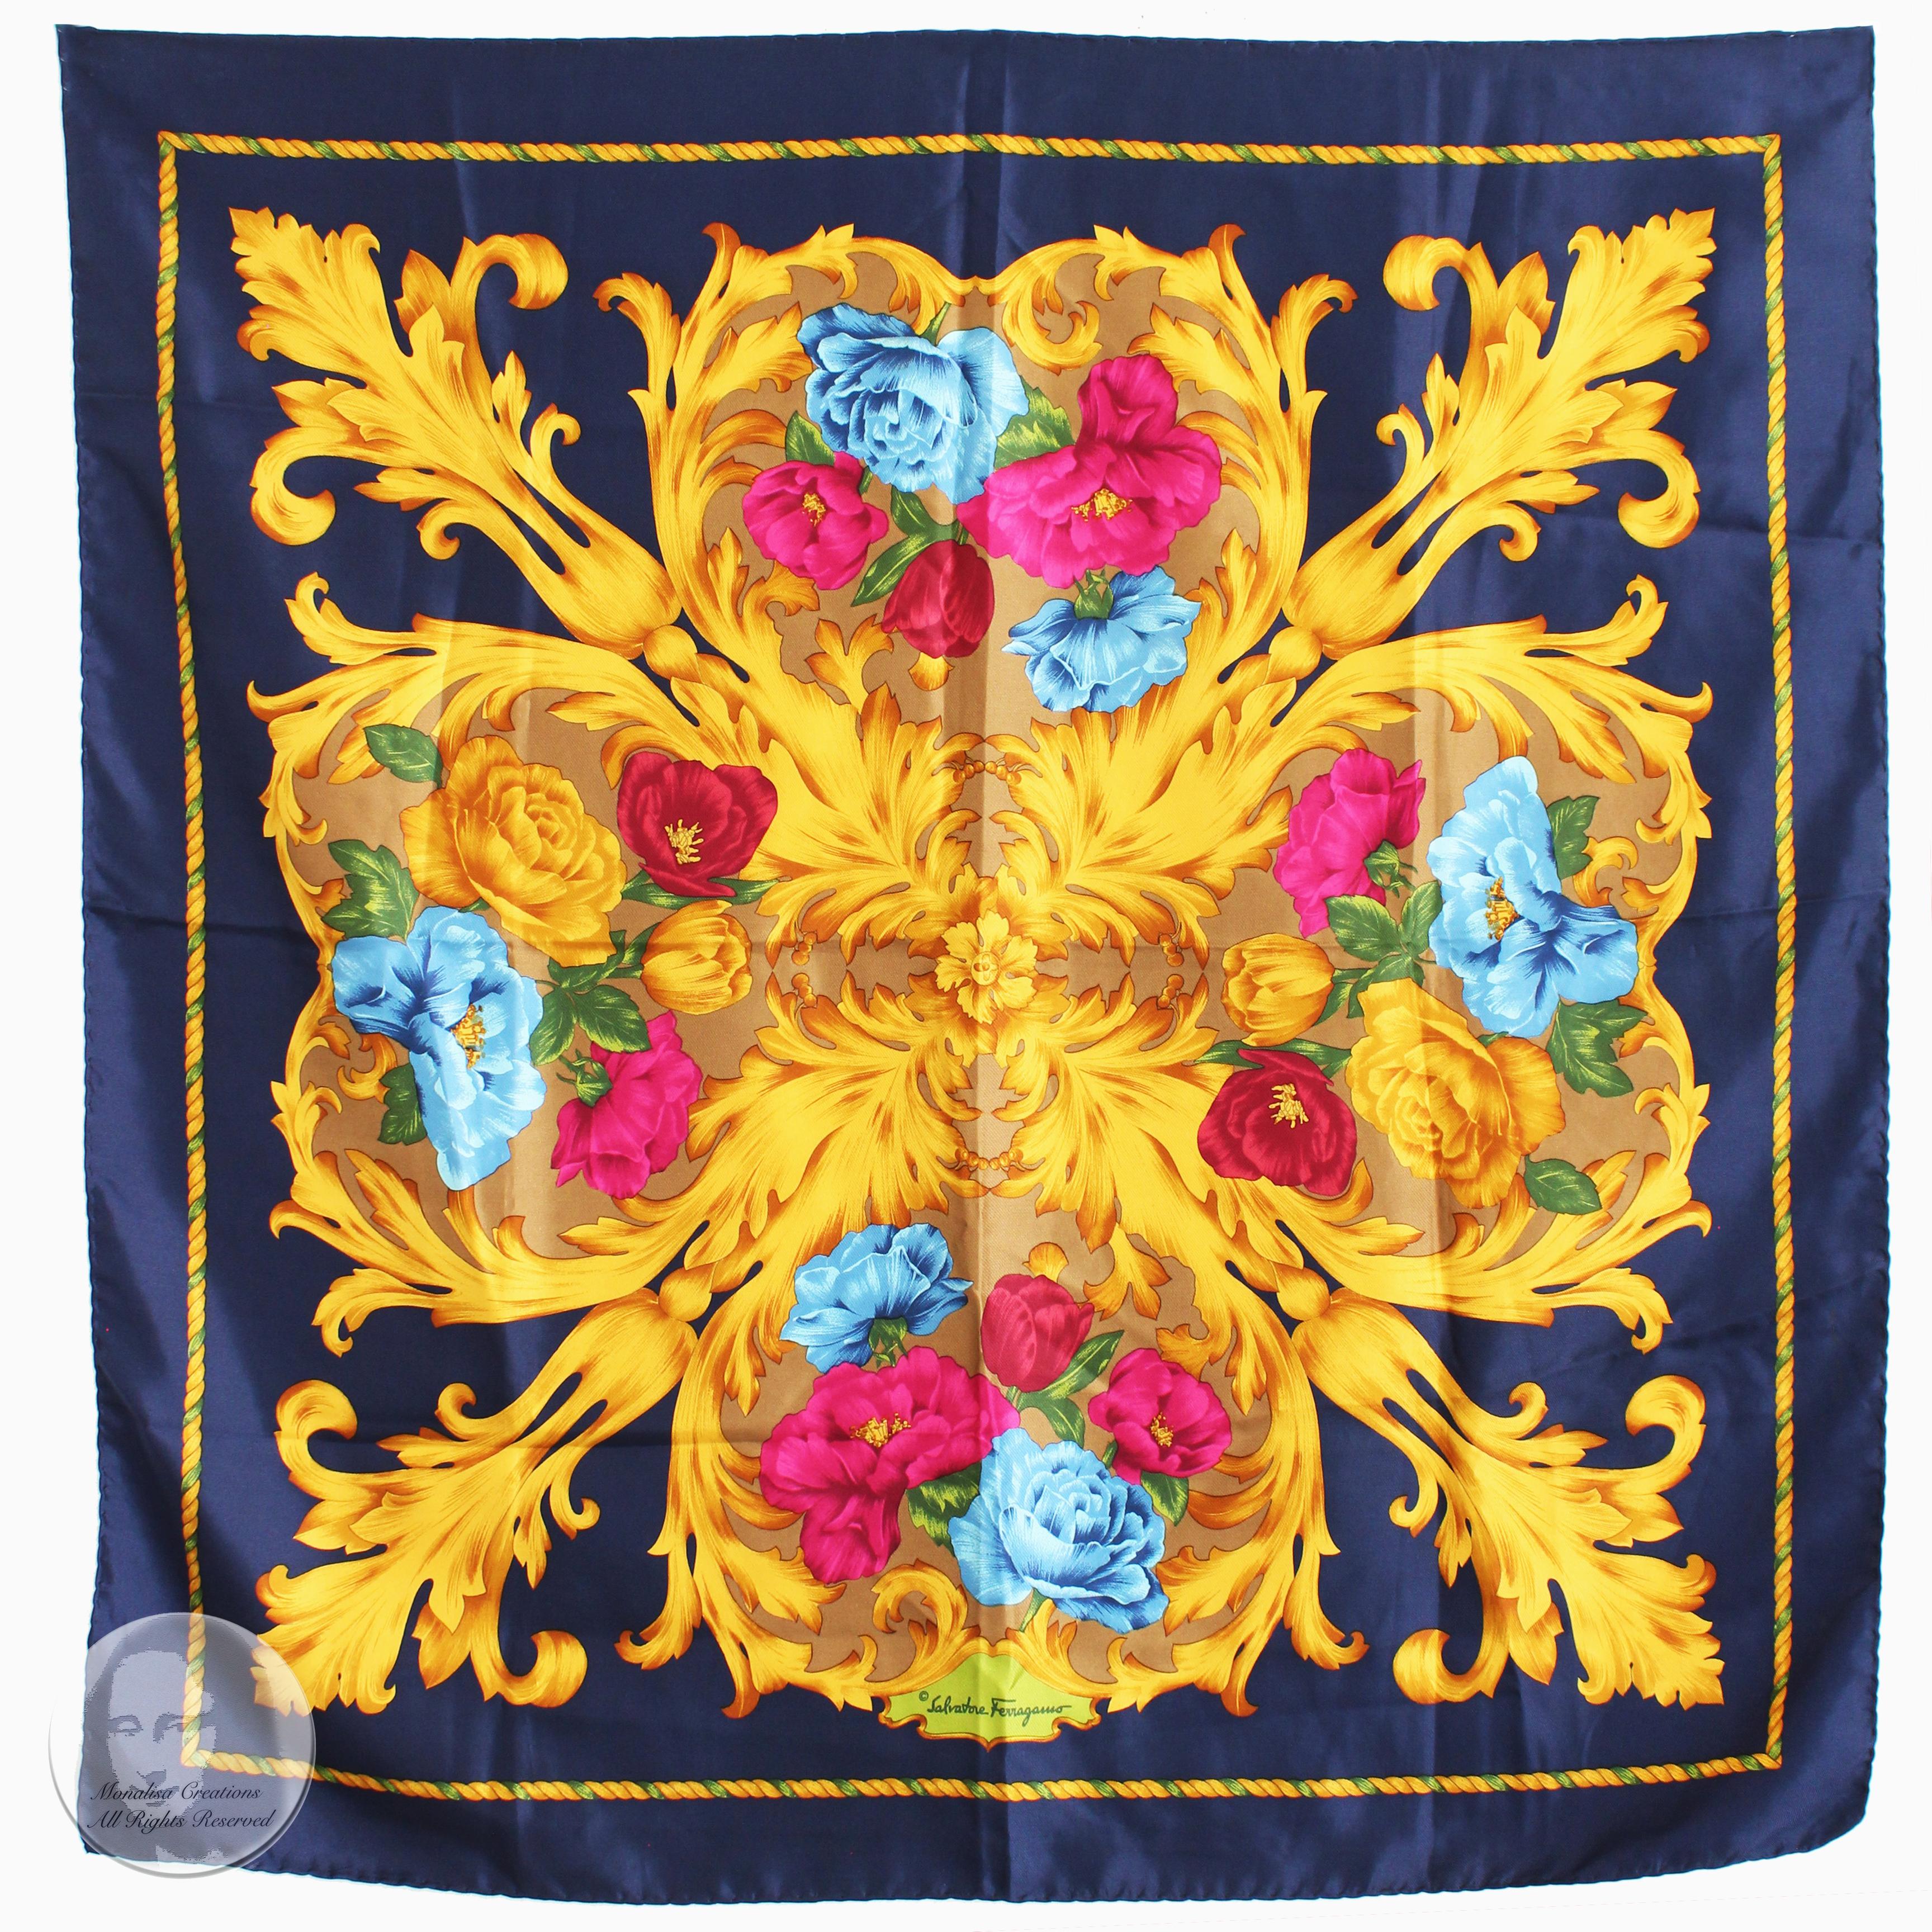 This silk scarf or shawl was made by Salvatore Ferragamo, most likely in the 90s. It features colorful pink, blue and red florals with gold baroque style stems against a navy blue background. 

A fabulous silk scarf that's so easy to style and wear!